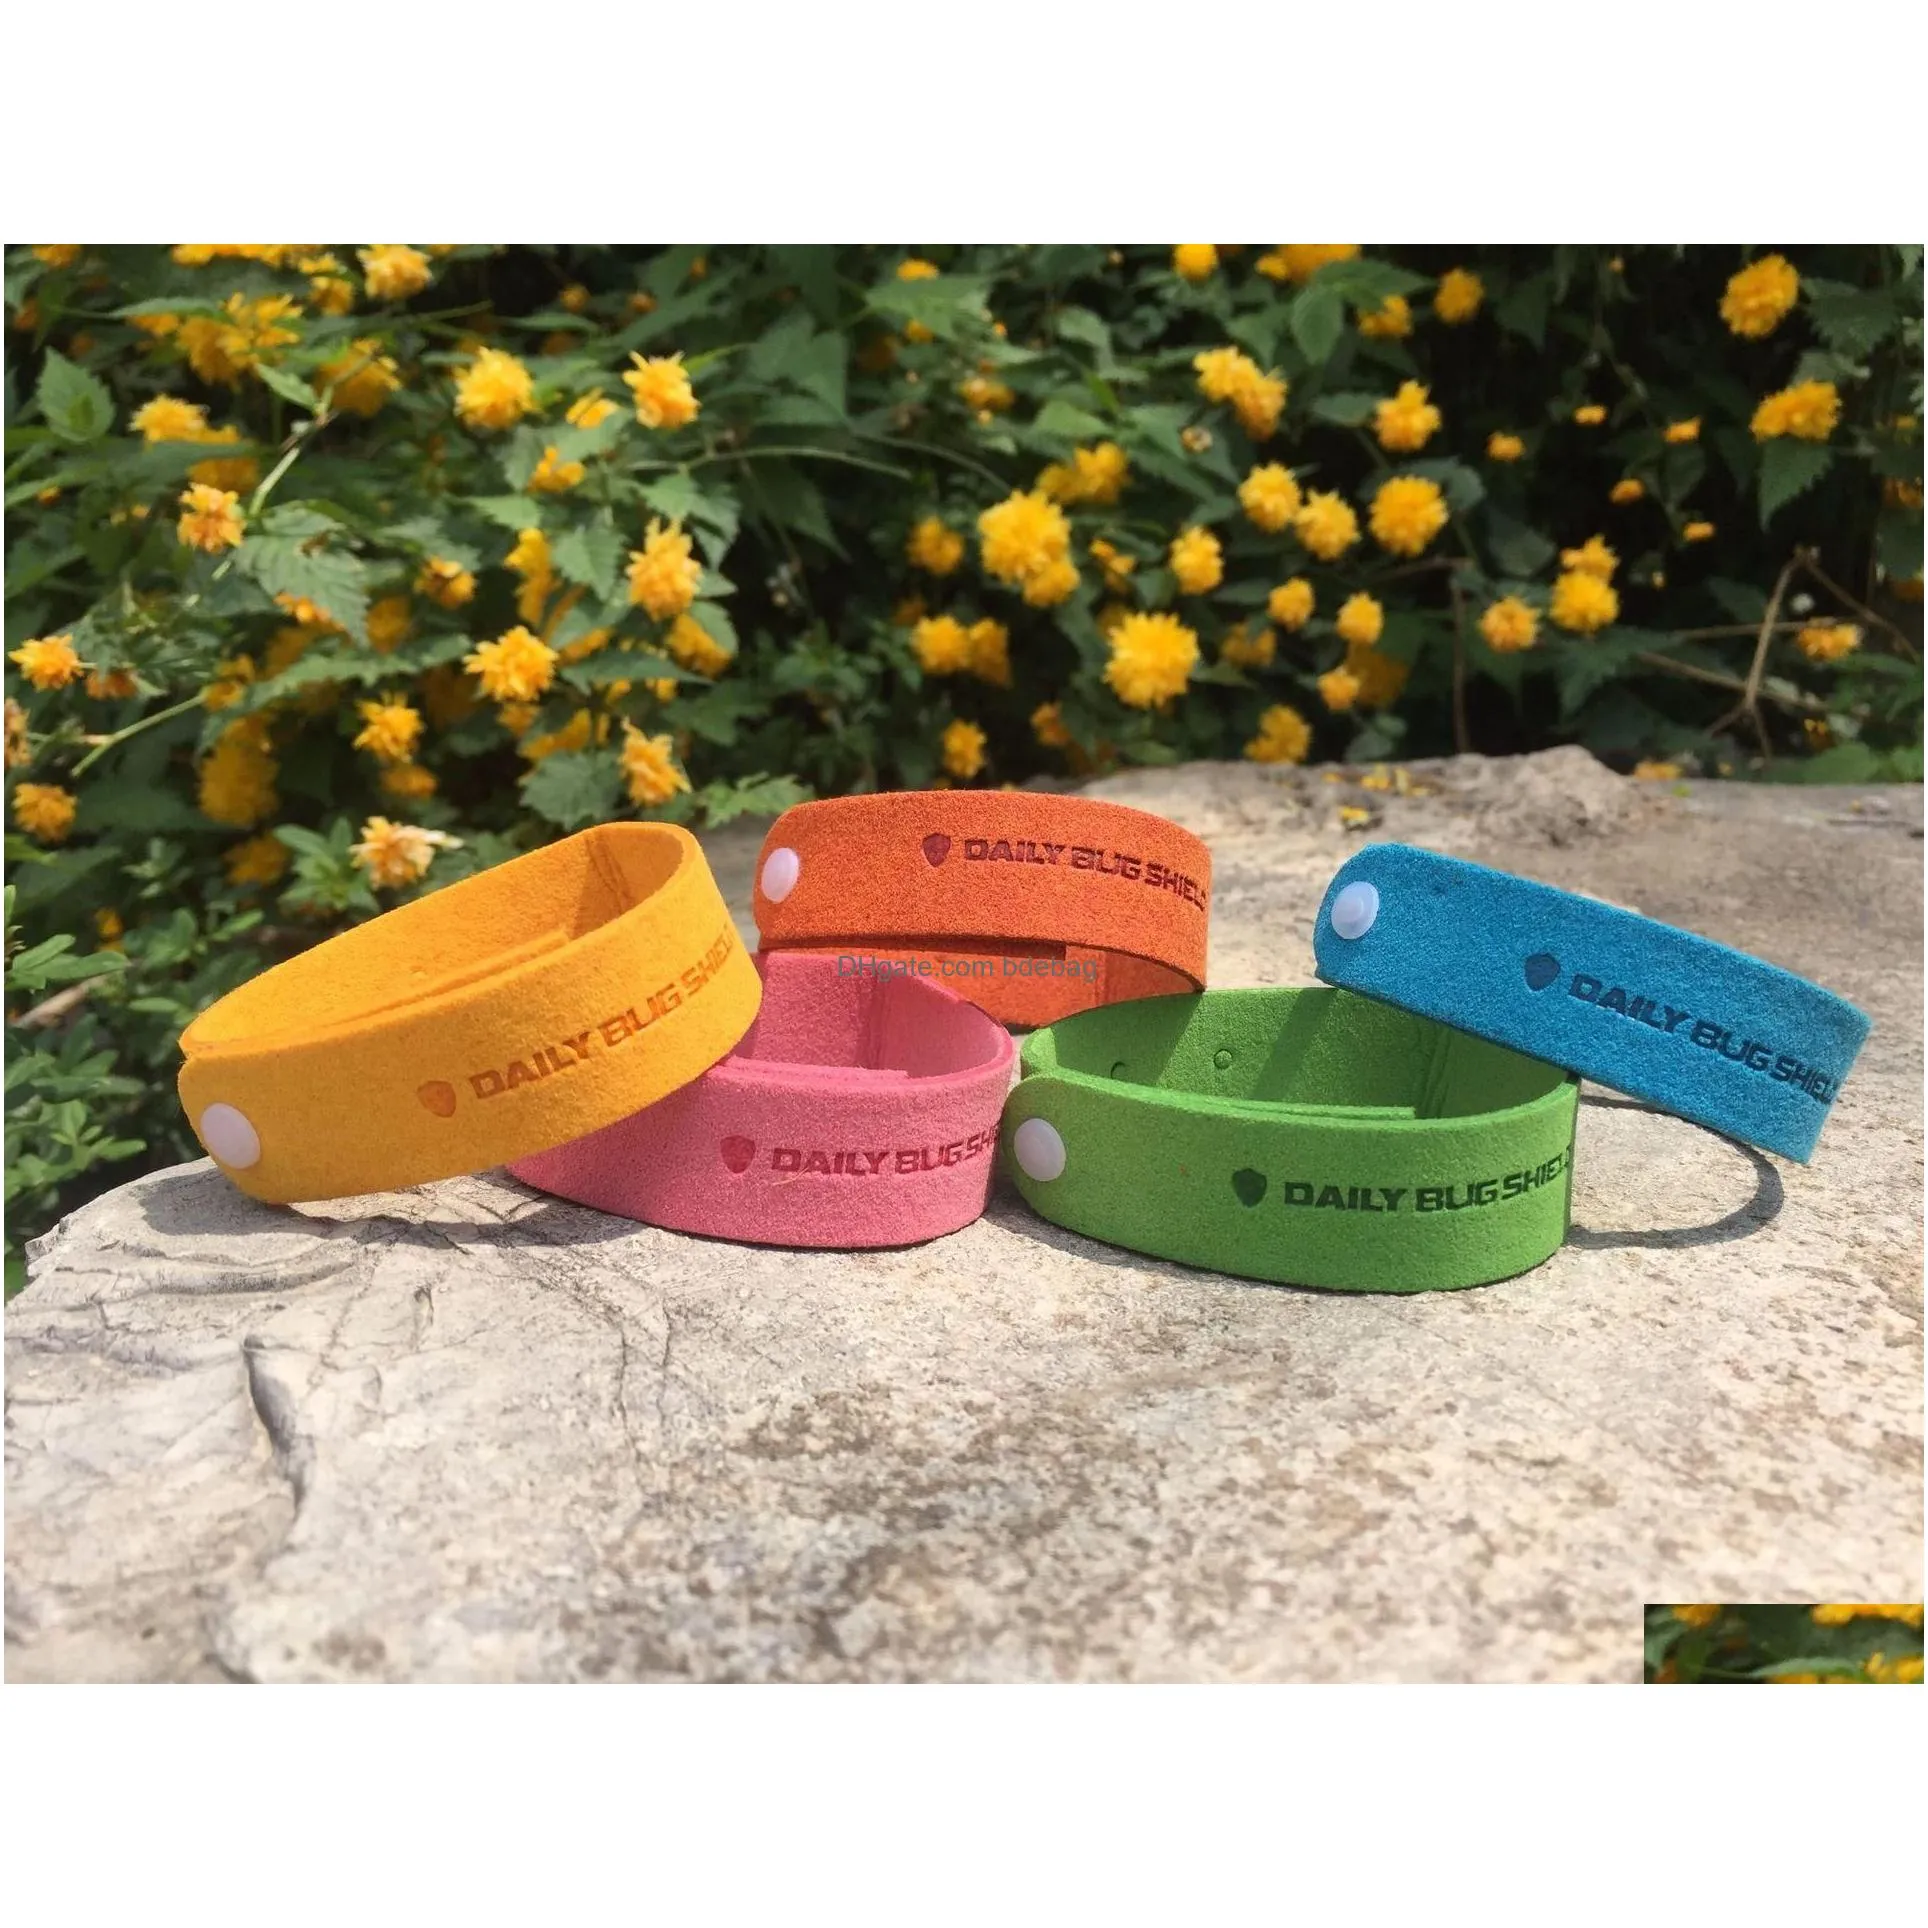  arrive antipest mosquito repellent band bracelets anti mosquito pure natural baby wristband pest control hand ring dh0147